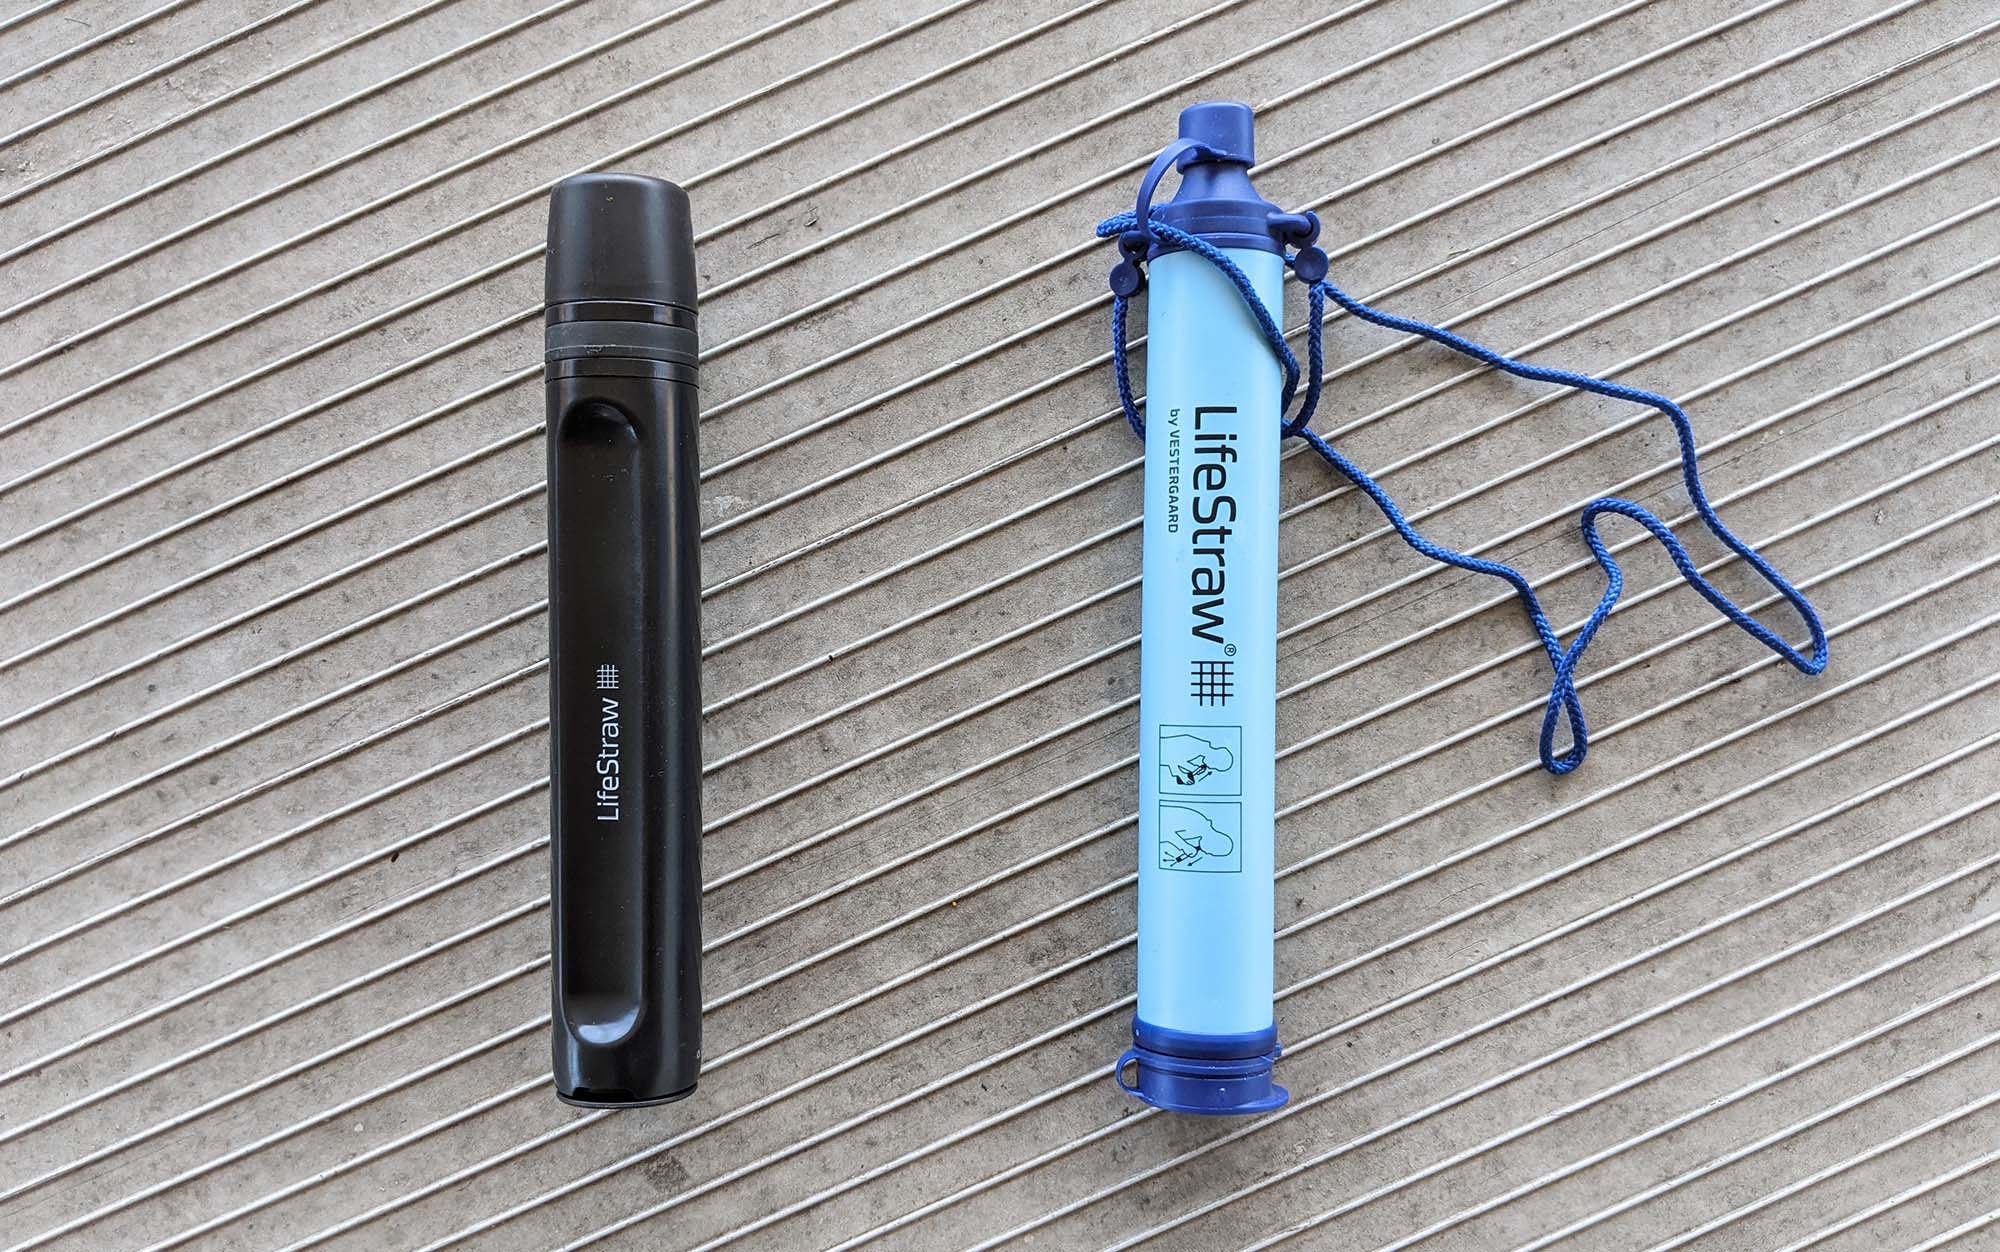 LifeStraw: Tested and Reviewed